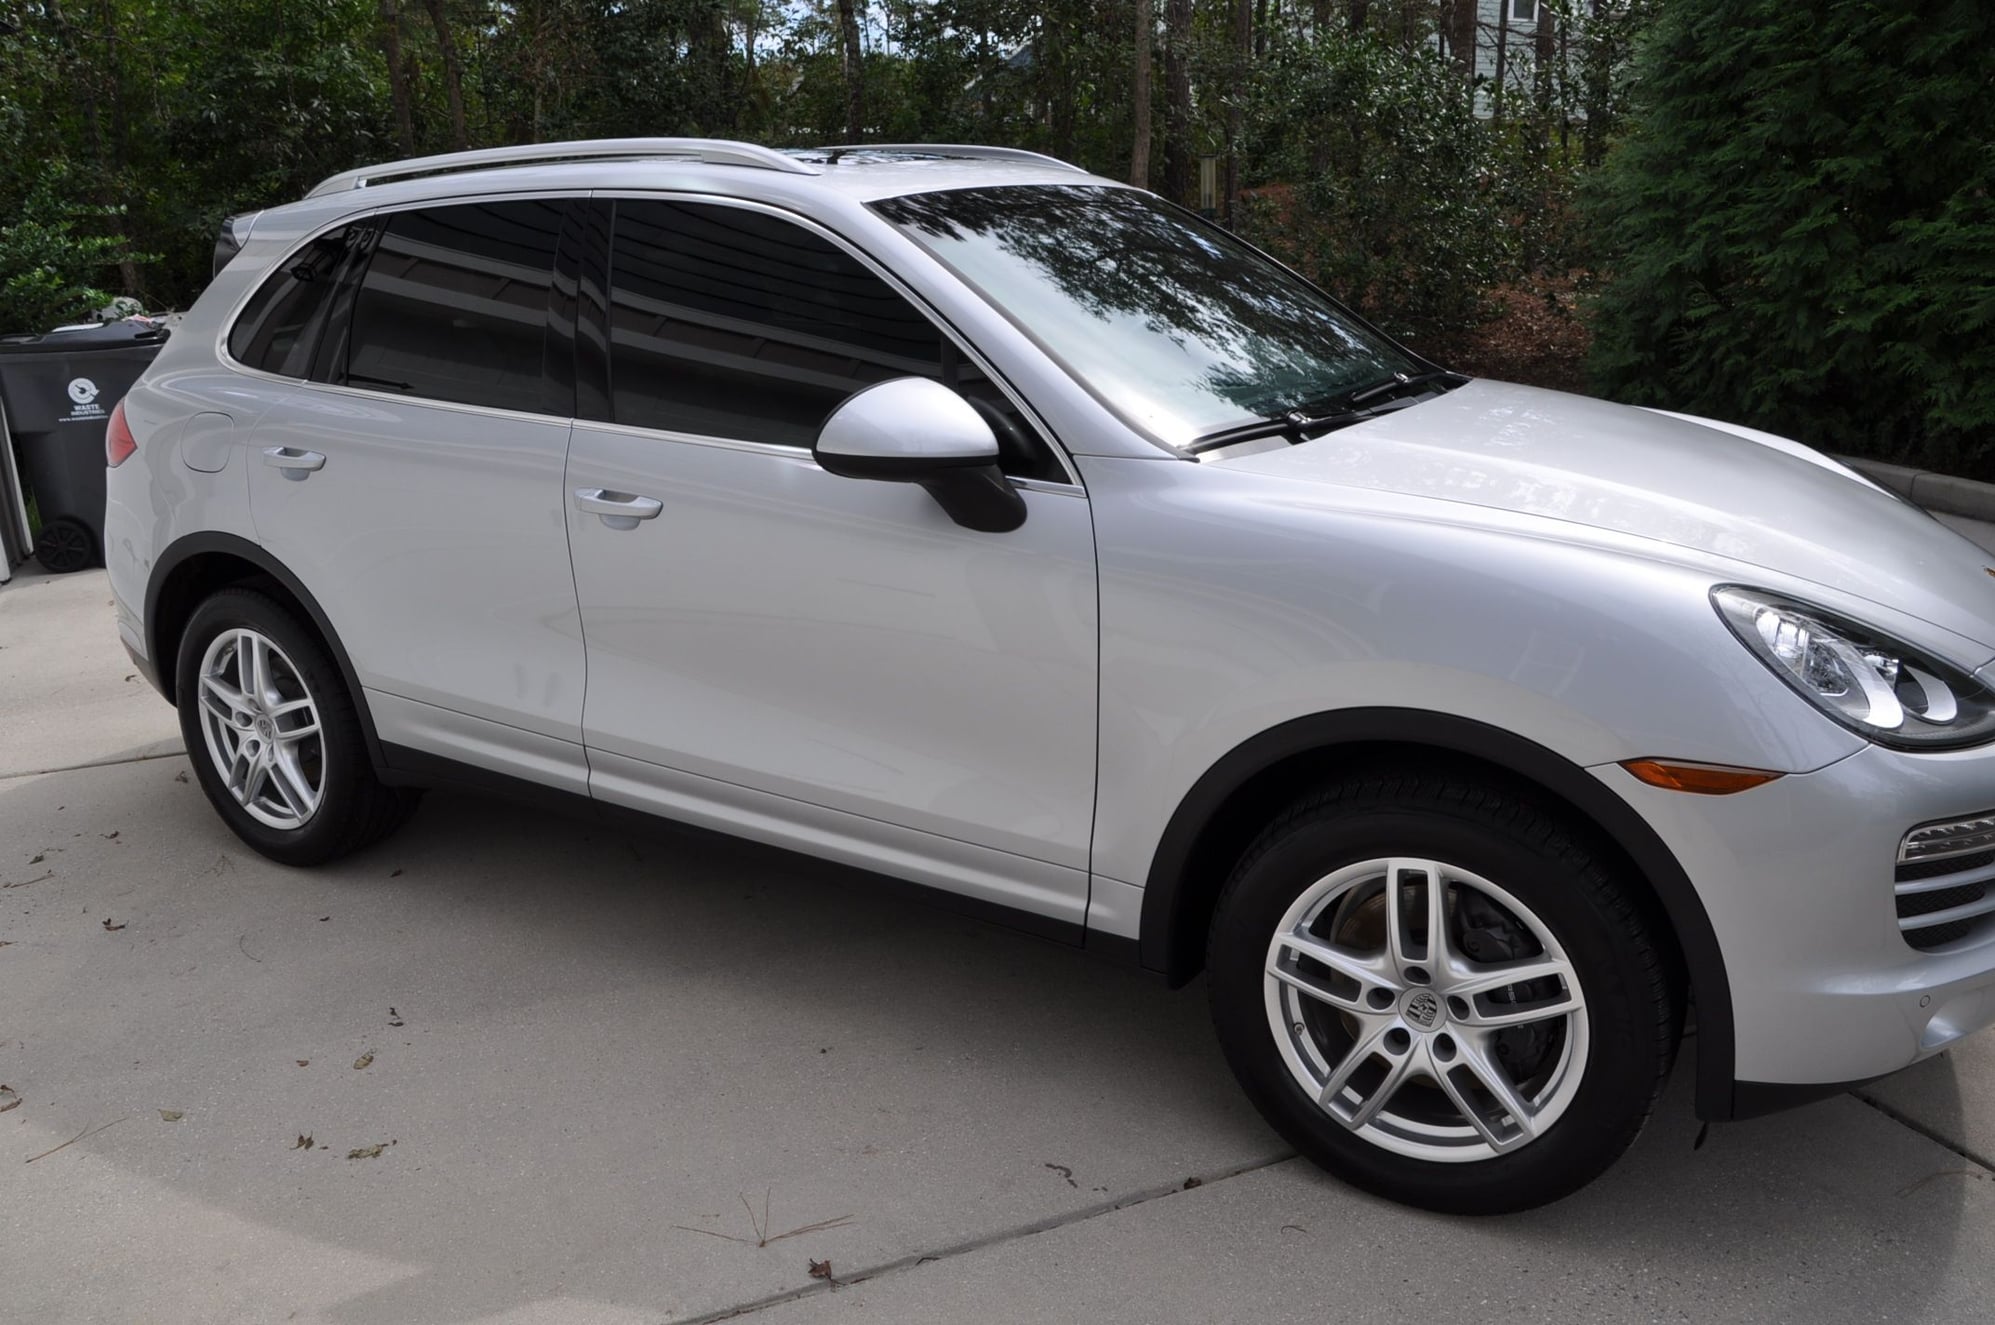 2013 Porsche Cayenne - 2013 Porsche Cayenne - rare manual transmission 6MT - Used - VIN WP1AA2A20DLA01259 - 42,970 Miles - 6 cyl - AWD - Manual - SUV - Silver - Wilmington, NC 28411, United States